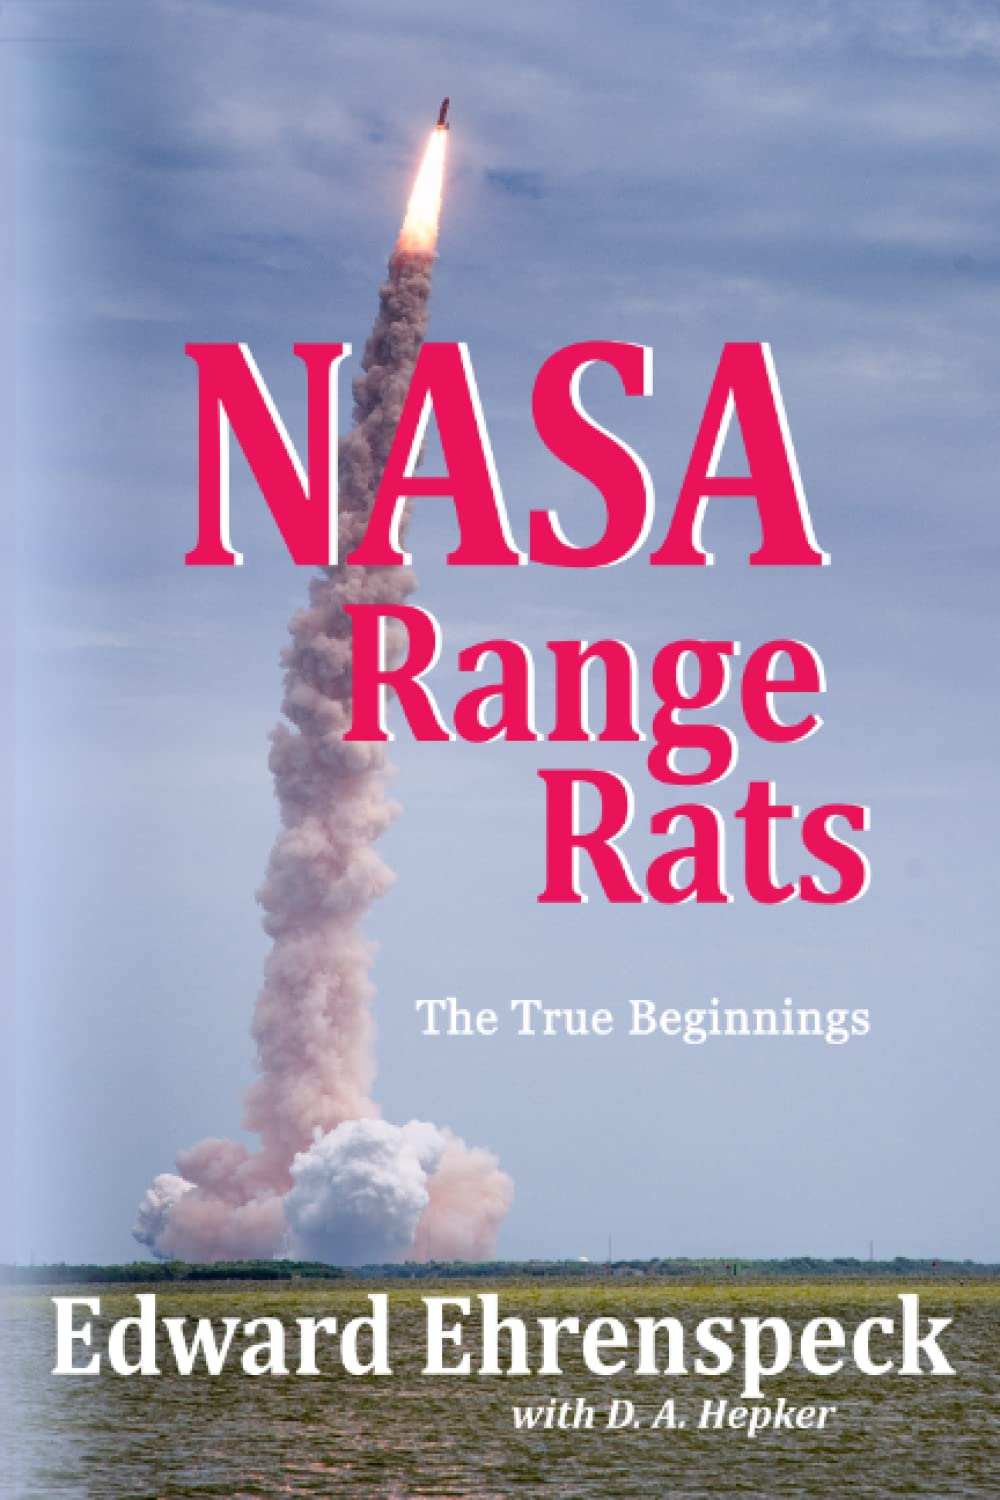 Edward Ehrenspeck & D. A. Hepker’s New Book "NASA Range Rats" is All About NASA, Rockets, Astronauts, Space Explorations and More